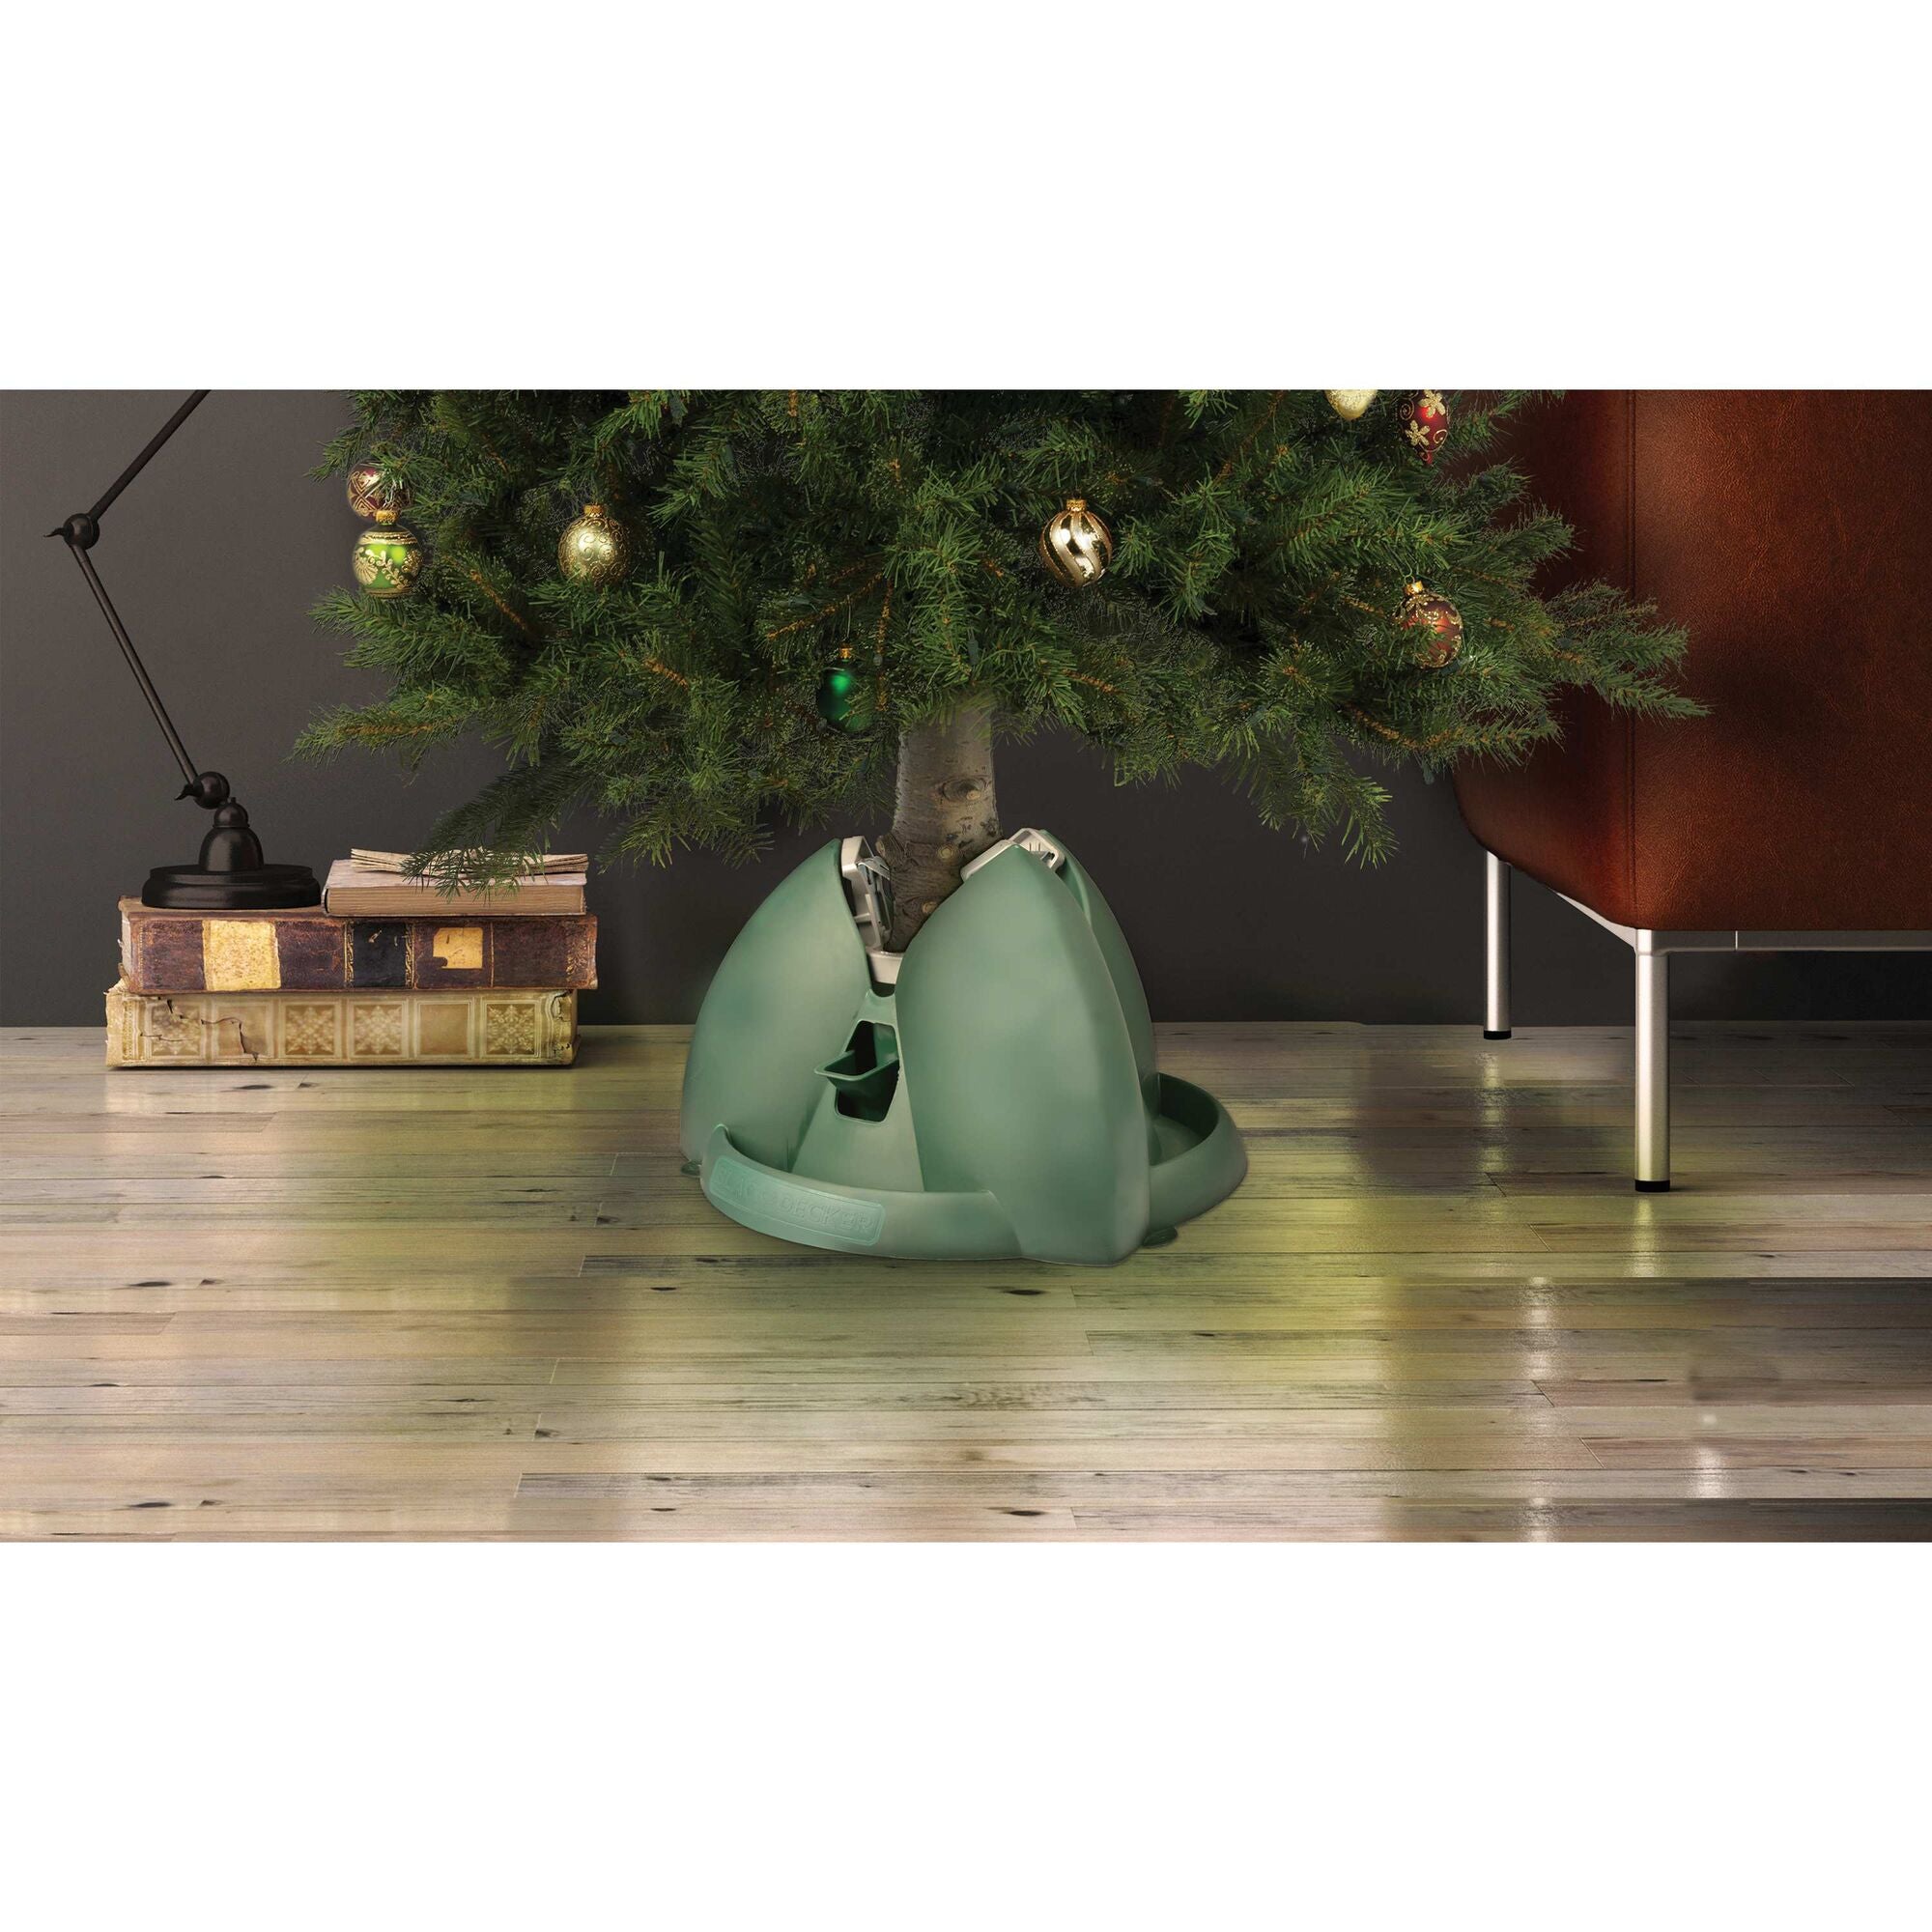 New Black & Decker BD3037 Smart Stand with 3.5-Liter Reservoir for 9'  Christmas Tree